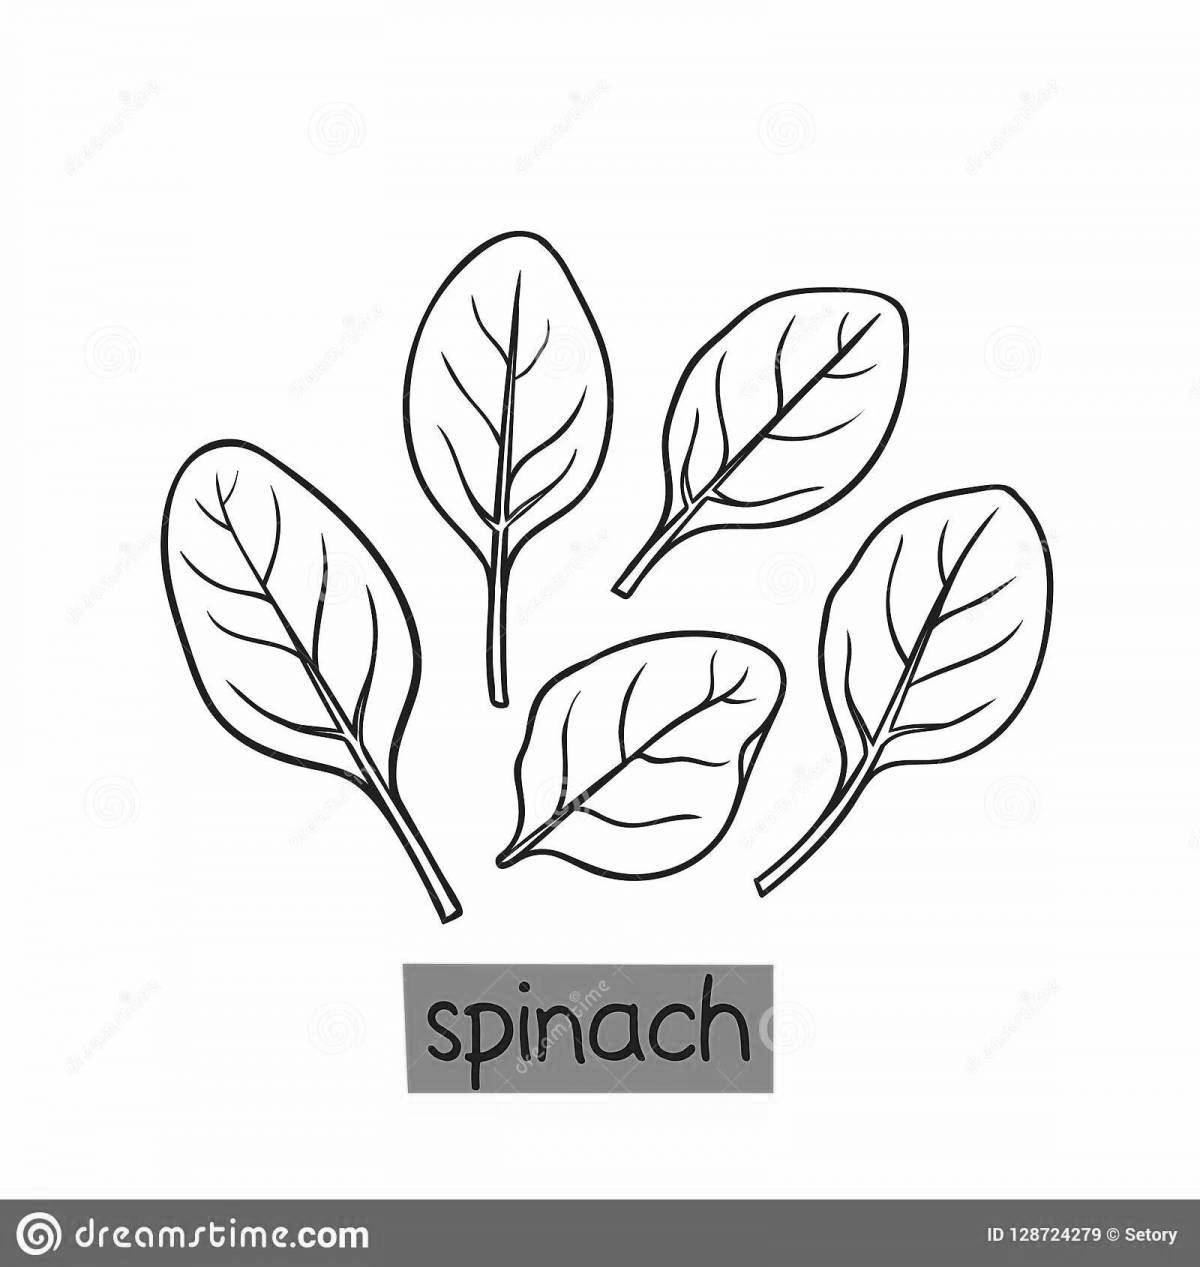 Adorable sorrel coloring page for students